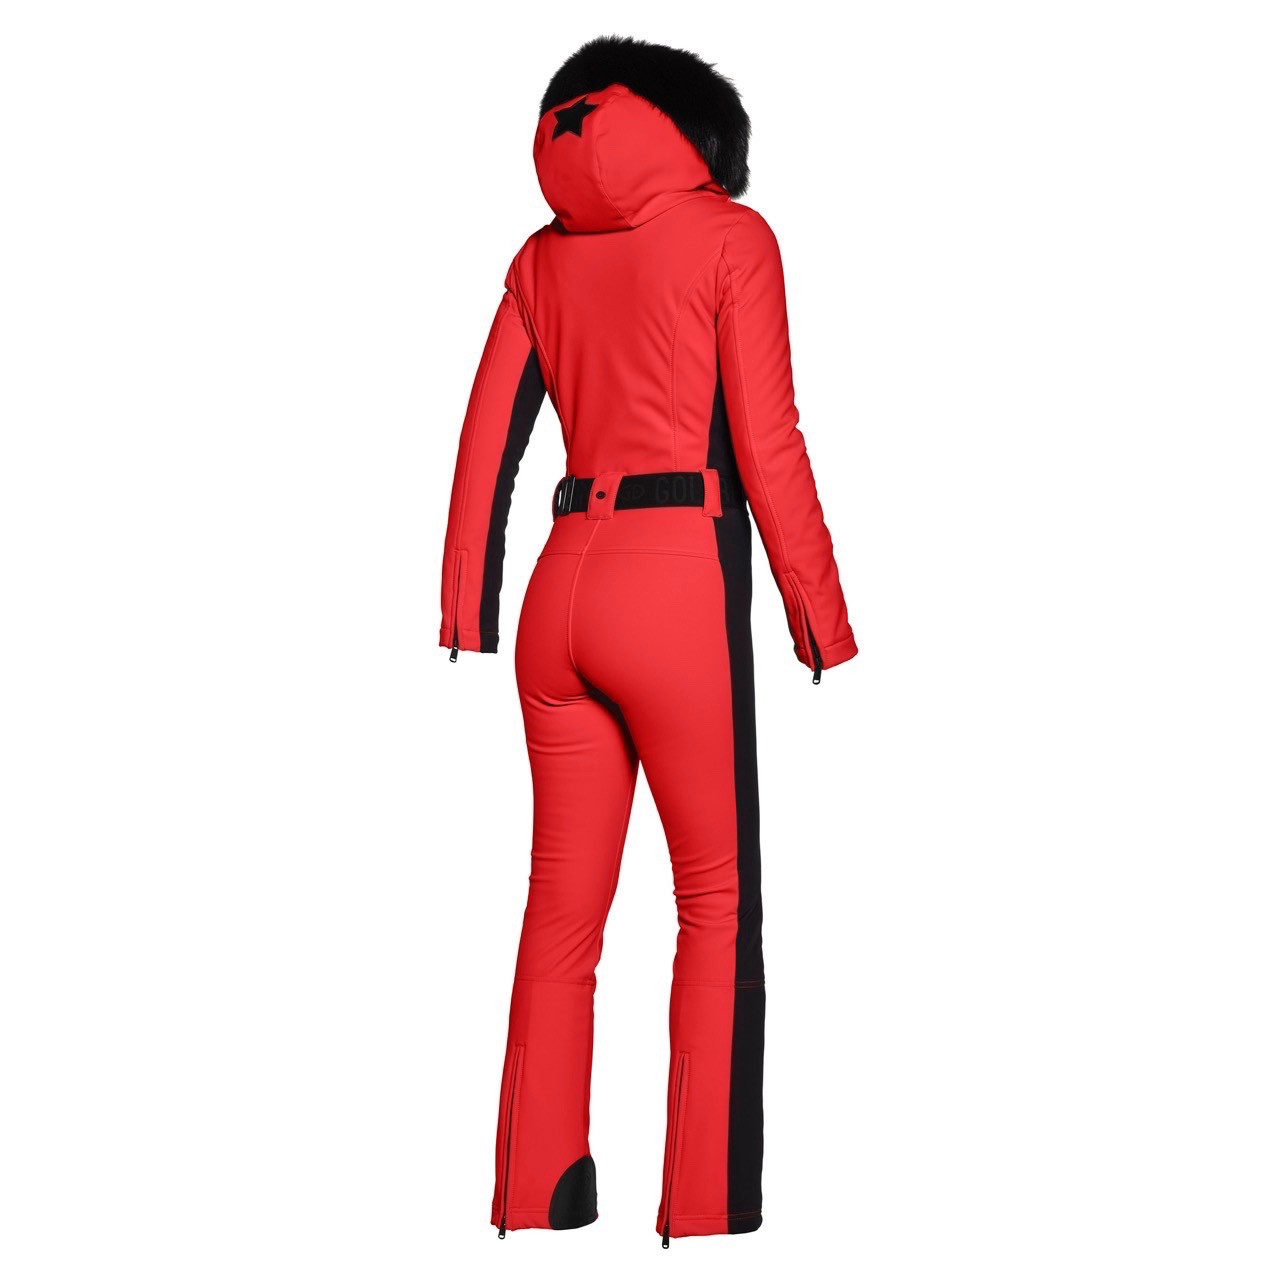 Goldbergh Parry Insulated Ski Suit (Women's)